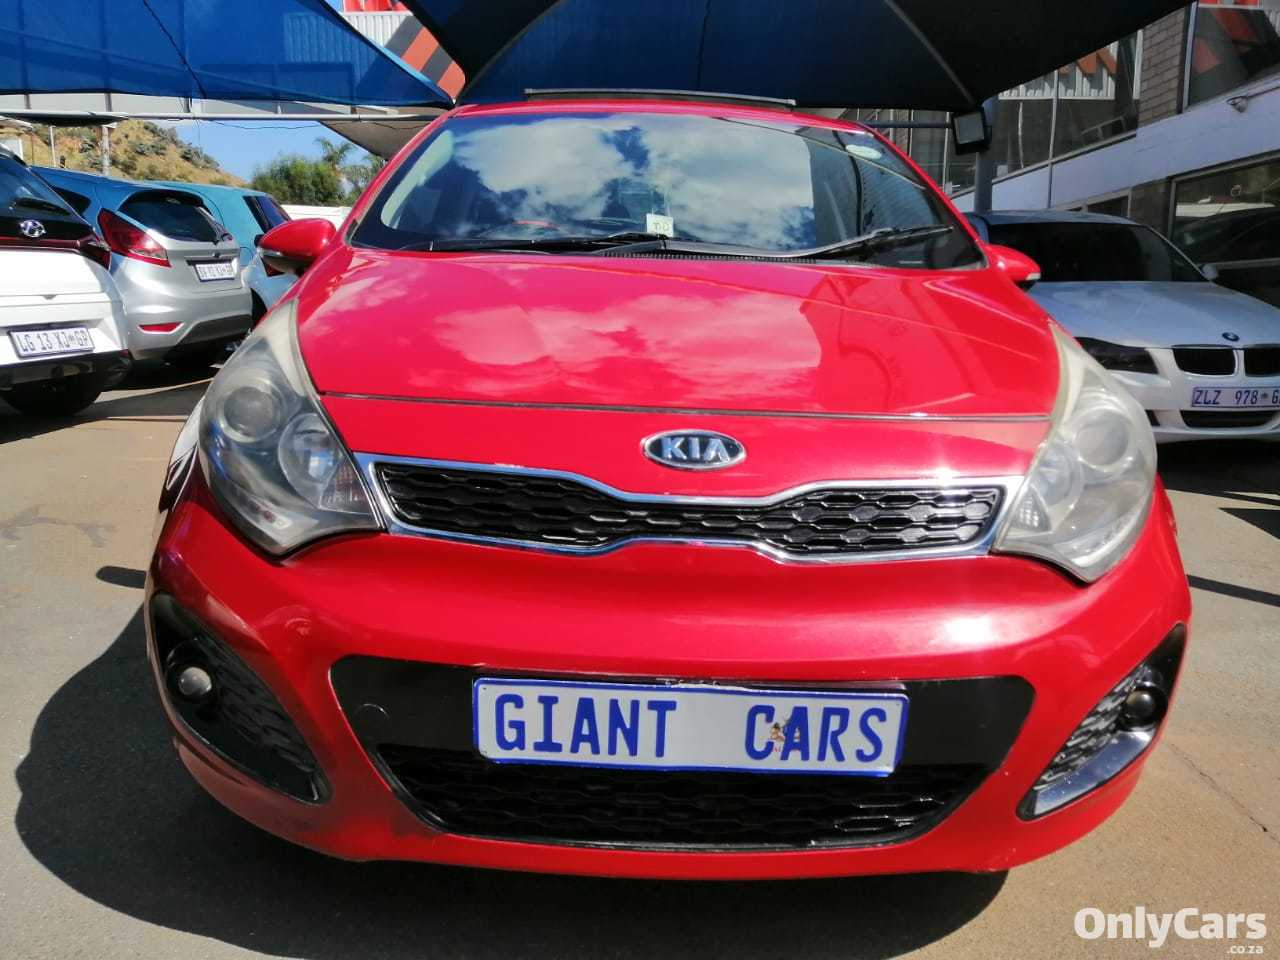 2014 Kia Rio Tec used car for sale in Johannesburg South Gauteng South Africa - OnlyCars.co.za